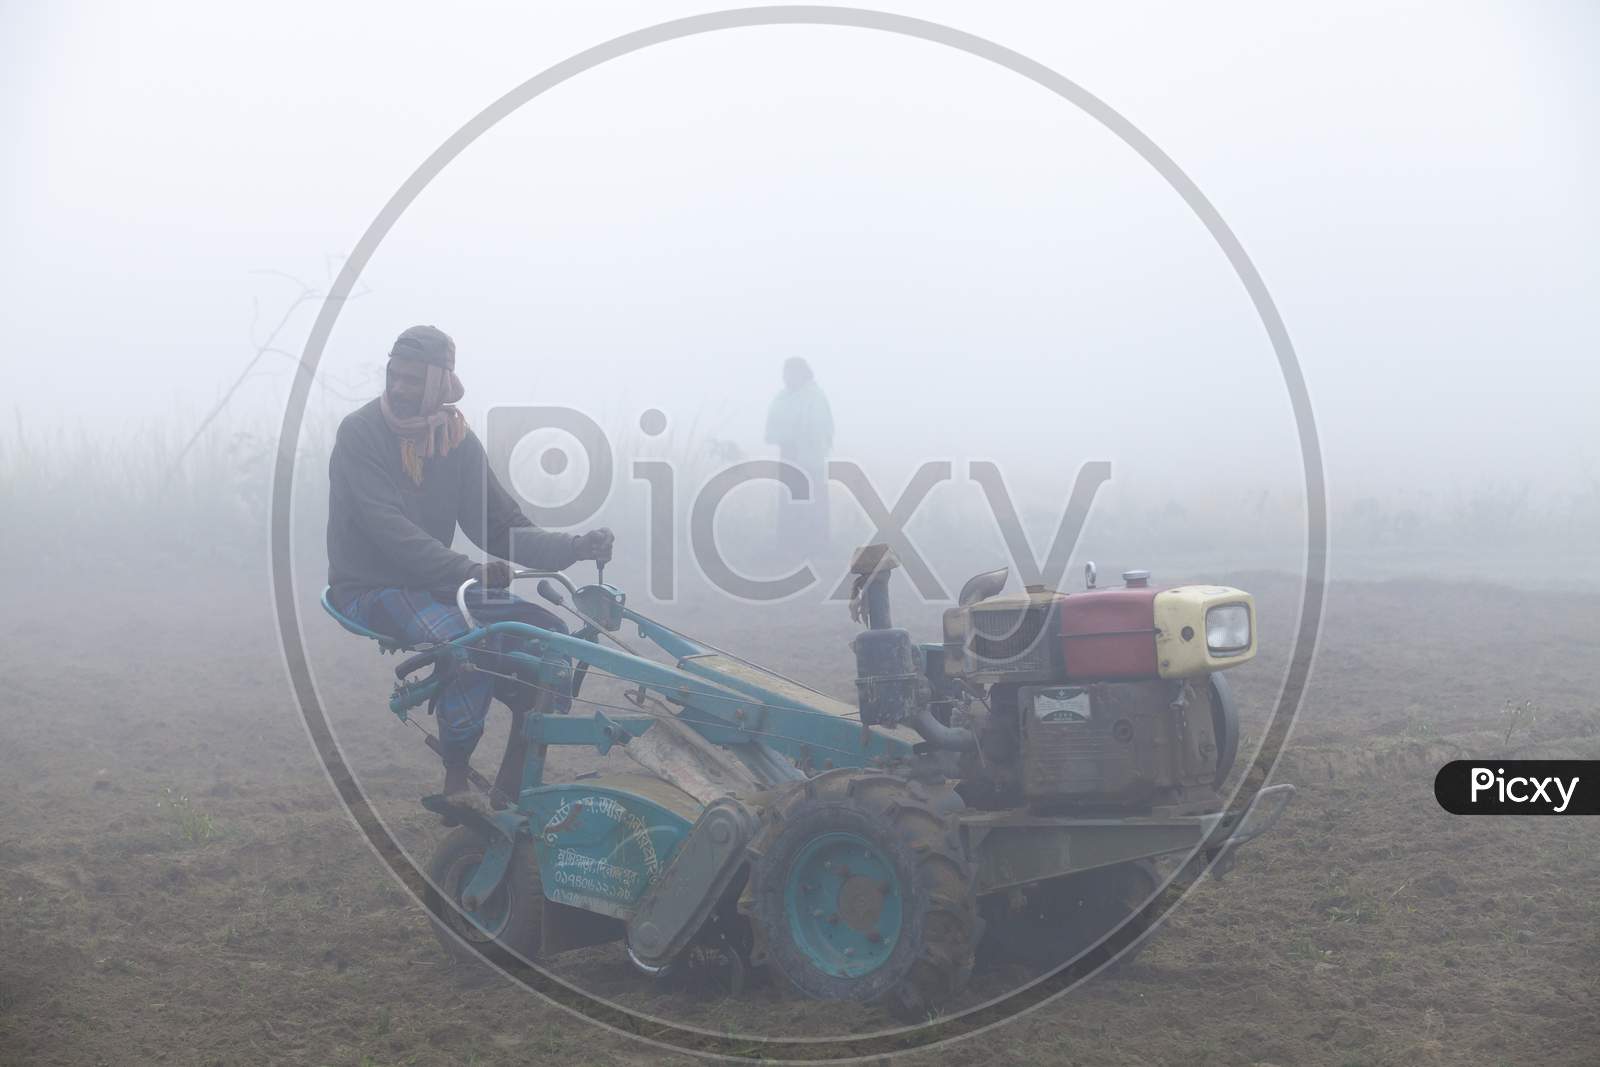 Bangladesh – January 06, 2014: On A Foggy Winter Morning, A Farmer Is Plowing His Land With A 2-Wheel Tractor At Ranisankail, Thakurgaon.